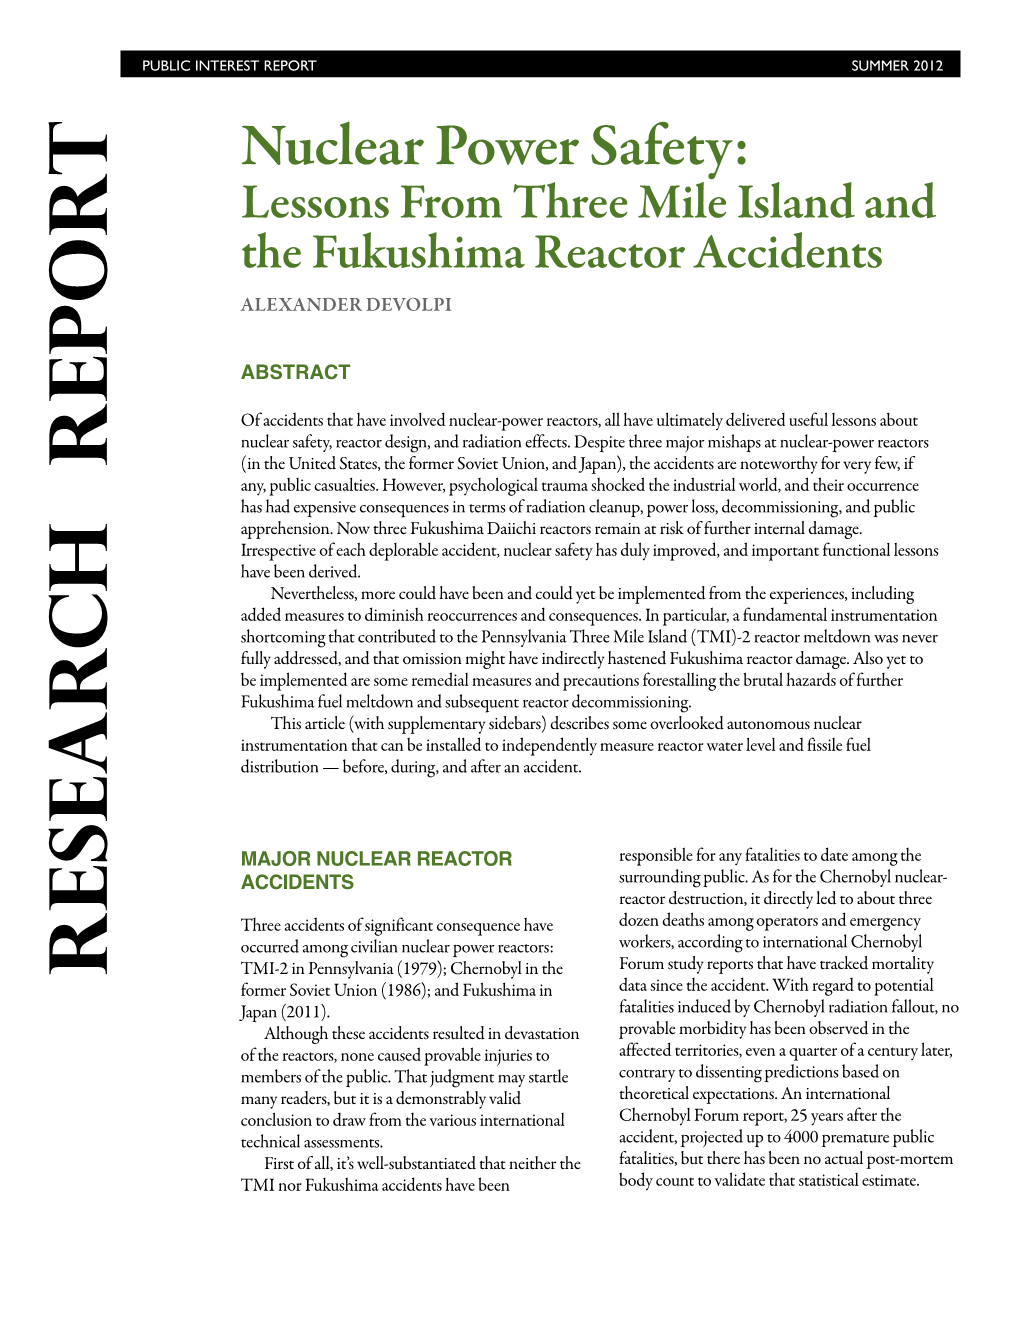 Nuclear Power Safety: Lessons from Three Mile Island and the Fukushima Reactor Accidents ALEXANDER DEVOLPI